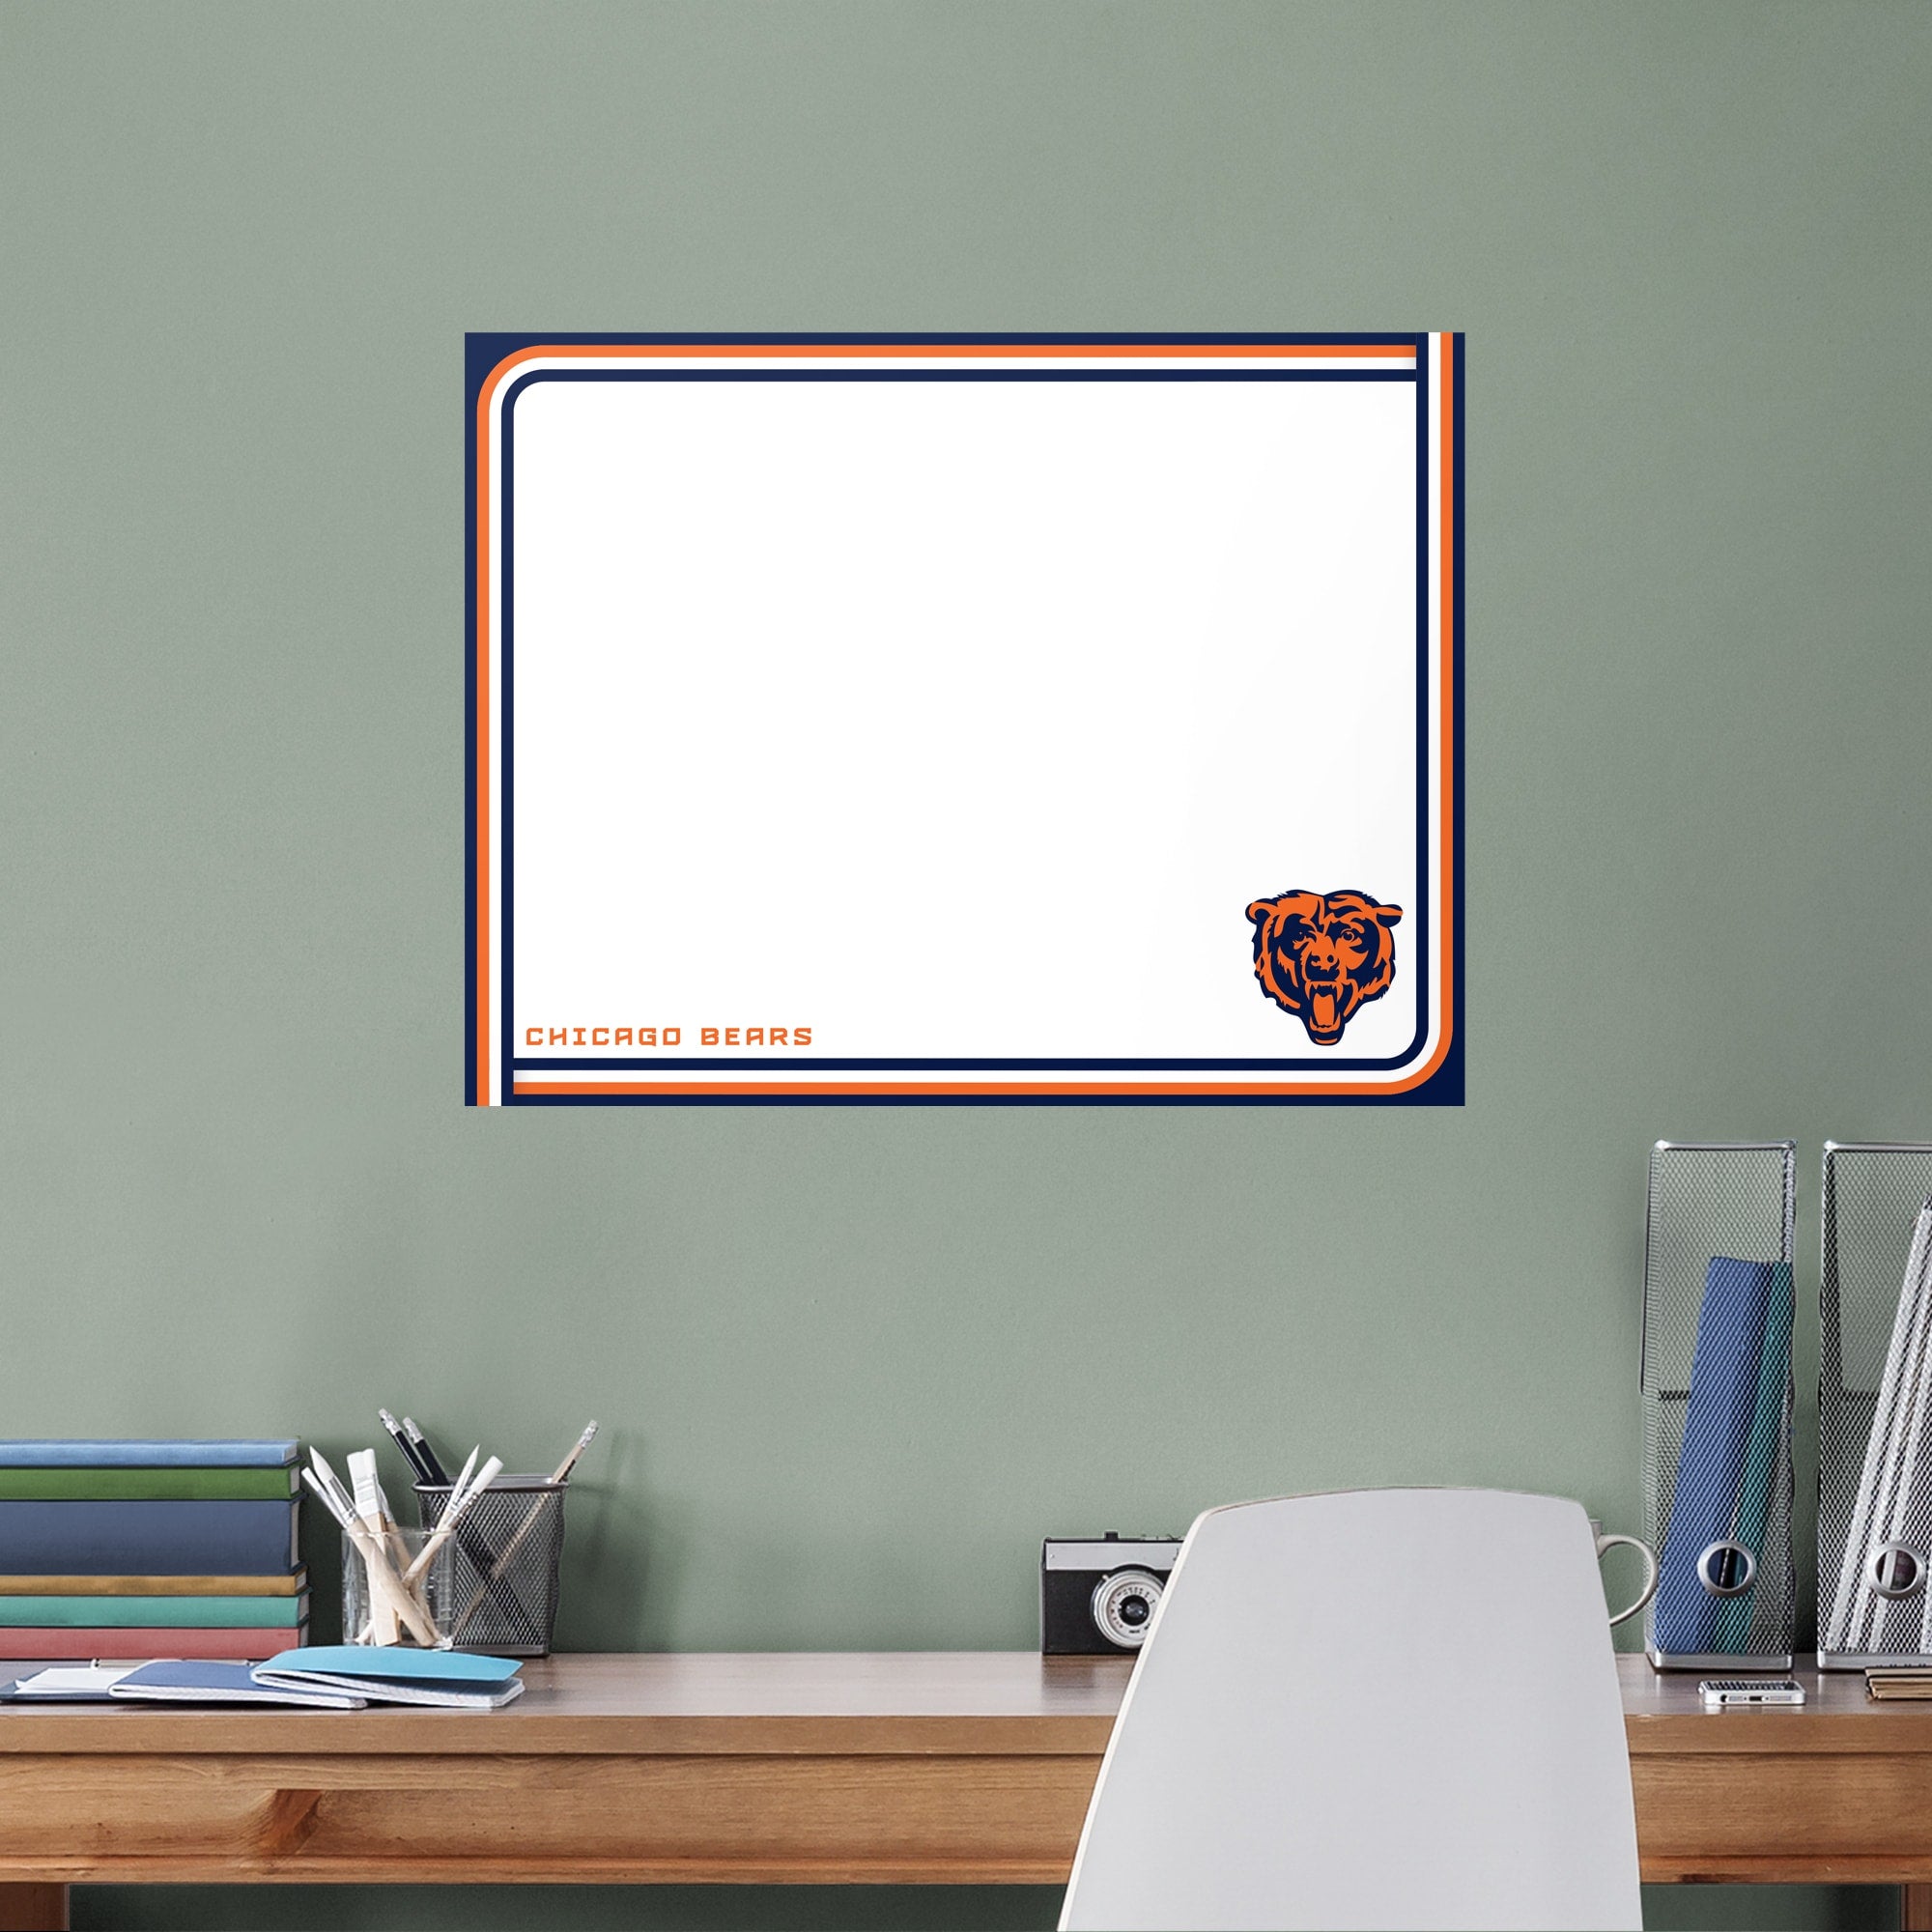 Chicago Bears: Dry Erase Whiteboard - Officially Licensed NFL Removable Wall Decal XL by Fathead | Vinyl